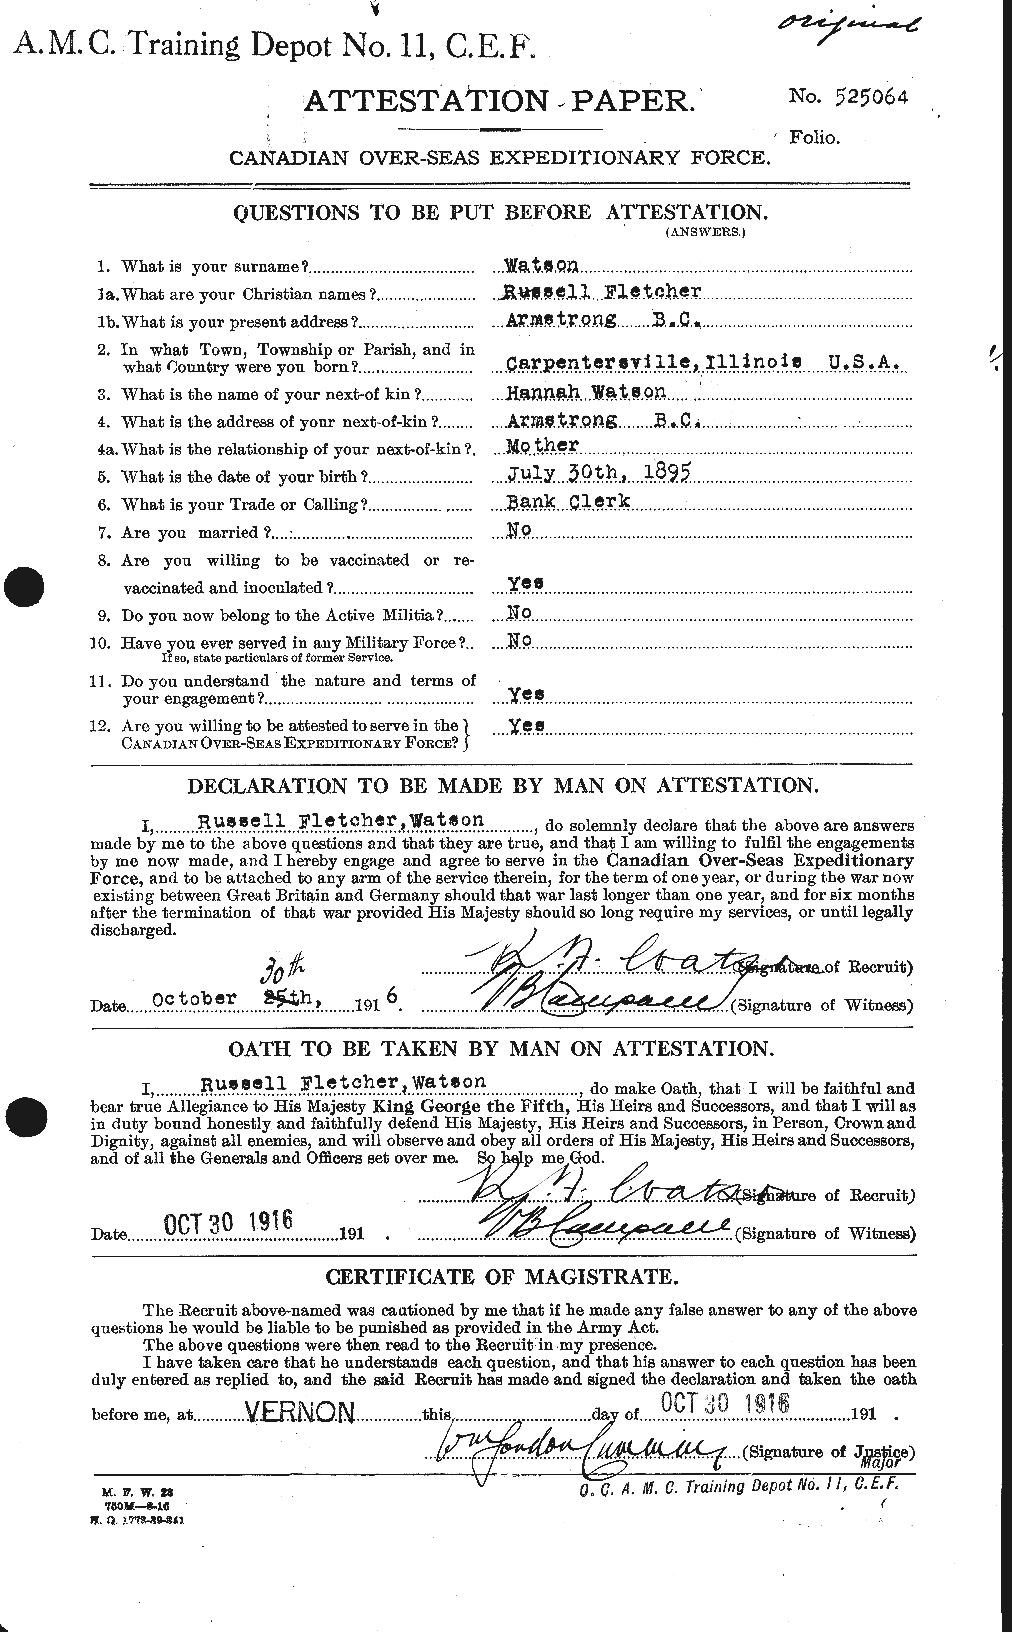 Personnel Records of the First World War - CEF 661268a